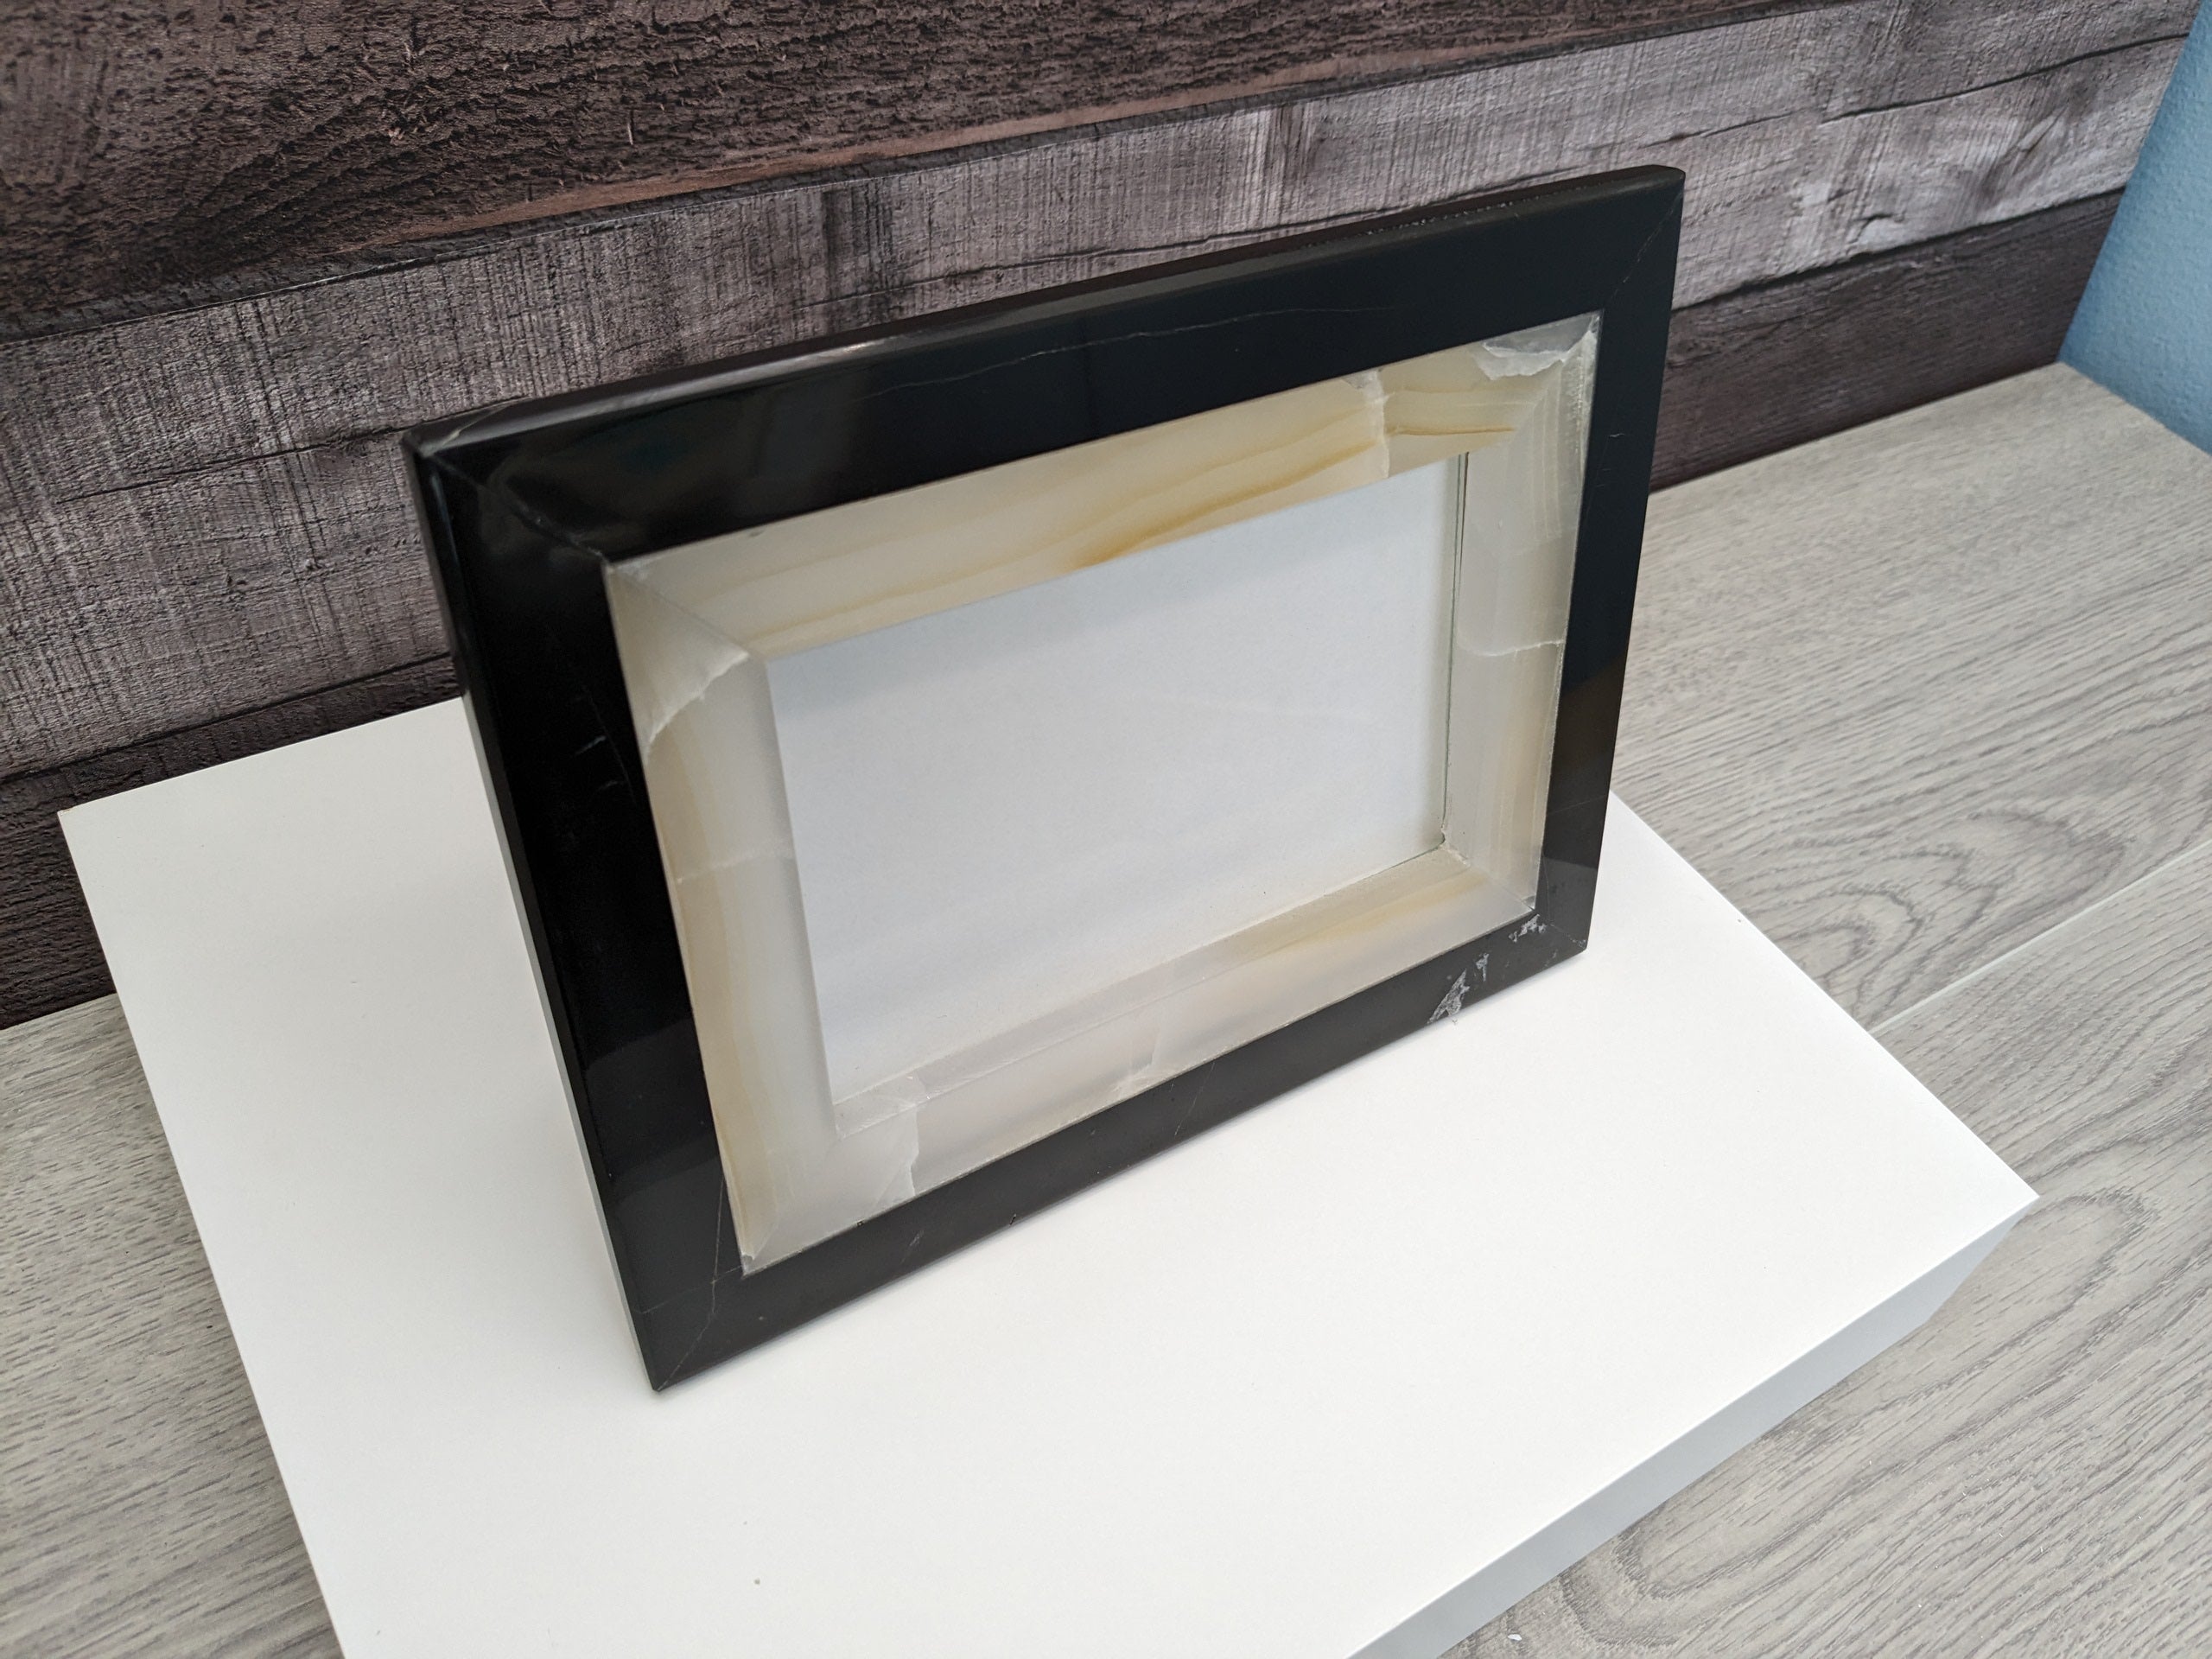 Black and White Onyx Frame with Glass Covering and a Travertine Stone Stand. Handmade in Mexico. We package and ship from the USA. Buy now at www.felipeandgrace.com.